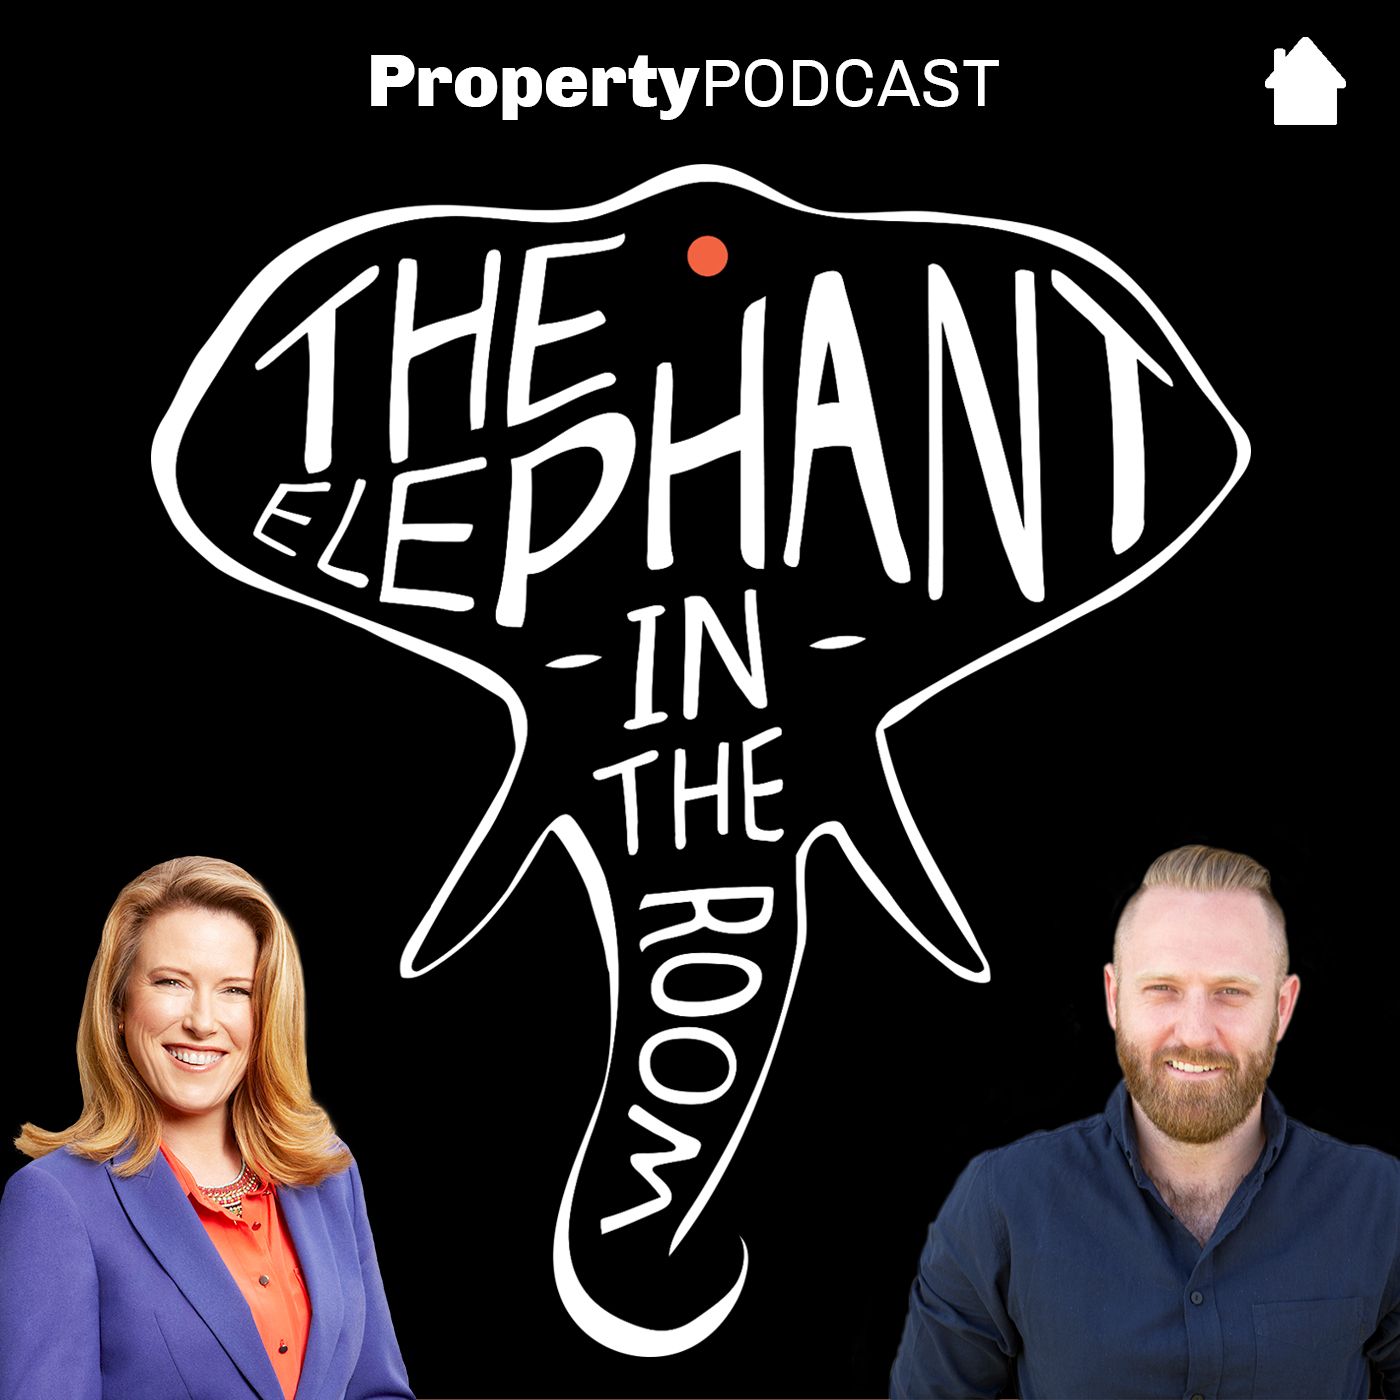 Ep 36 - Tim Heavyside | How can an auctioneer influence bidders even in a buyers' market?